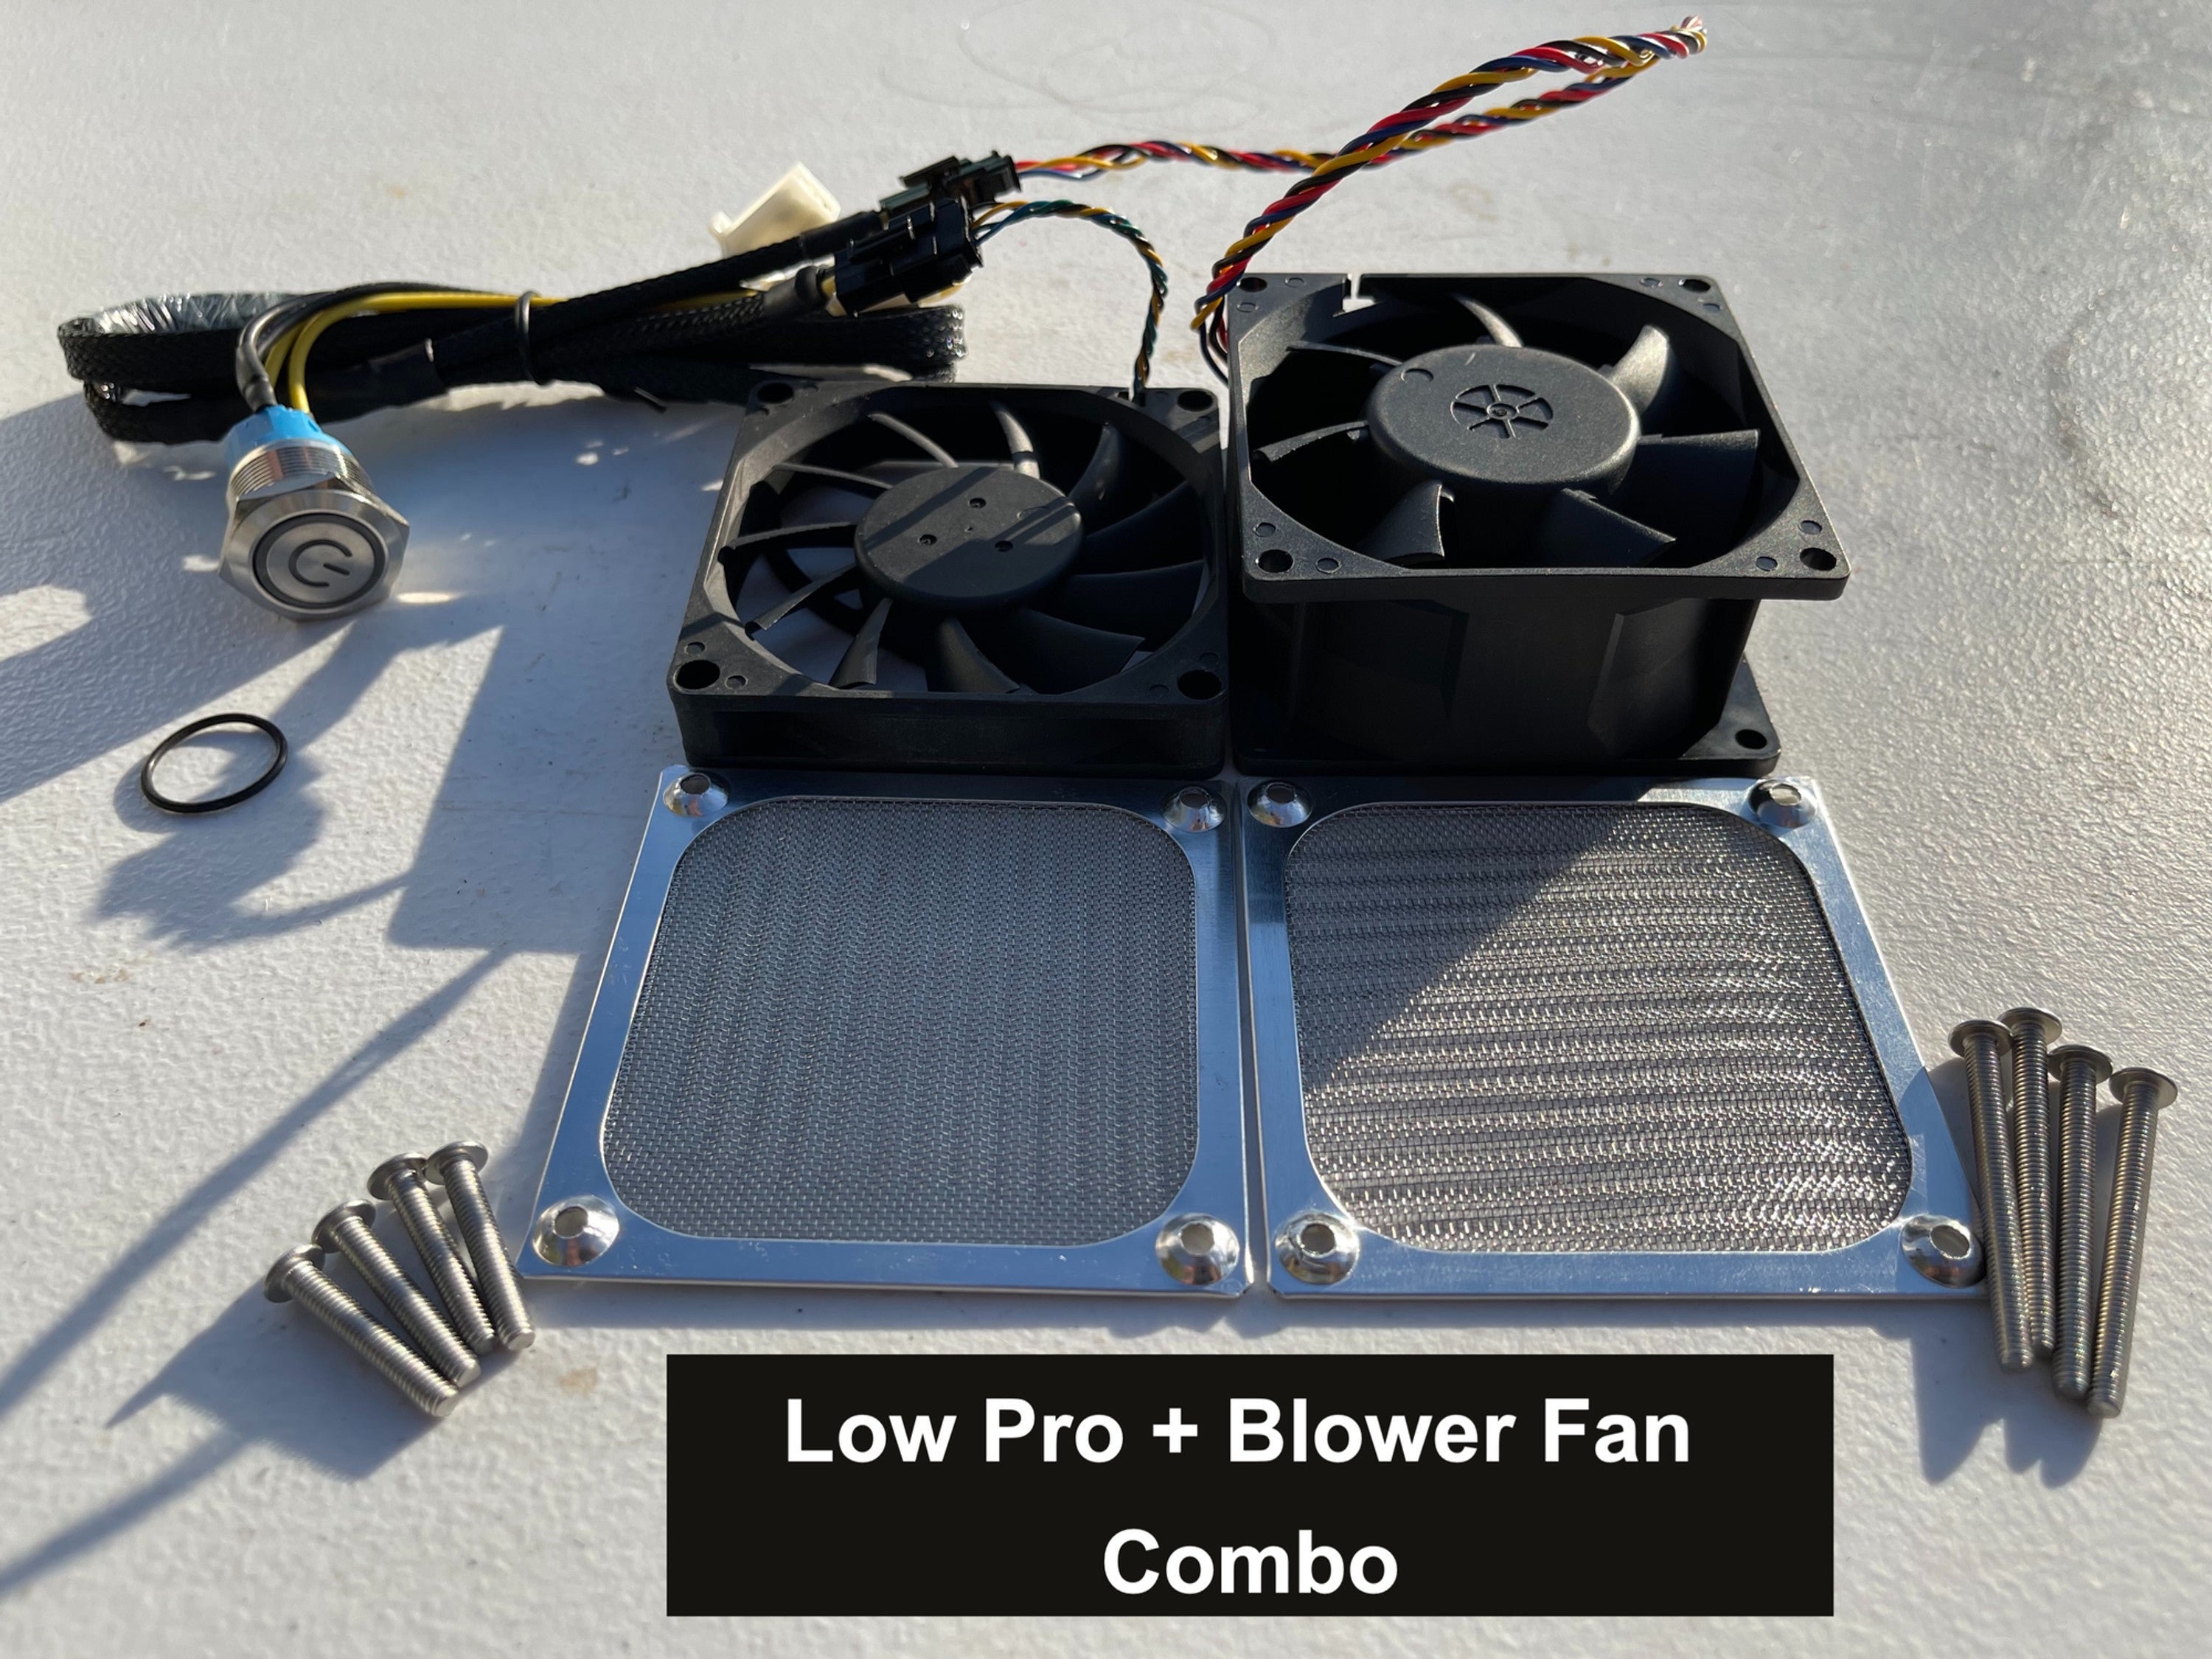 MY1020+ Ultimate Heat Sink Cooling Fans: 12V Accessory - Electro & Company Inc.